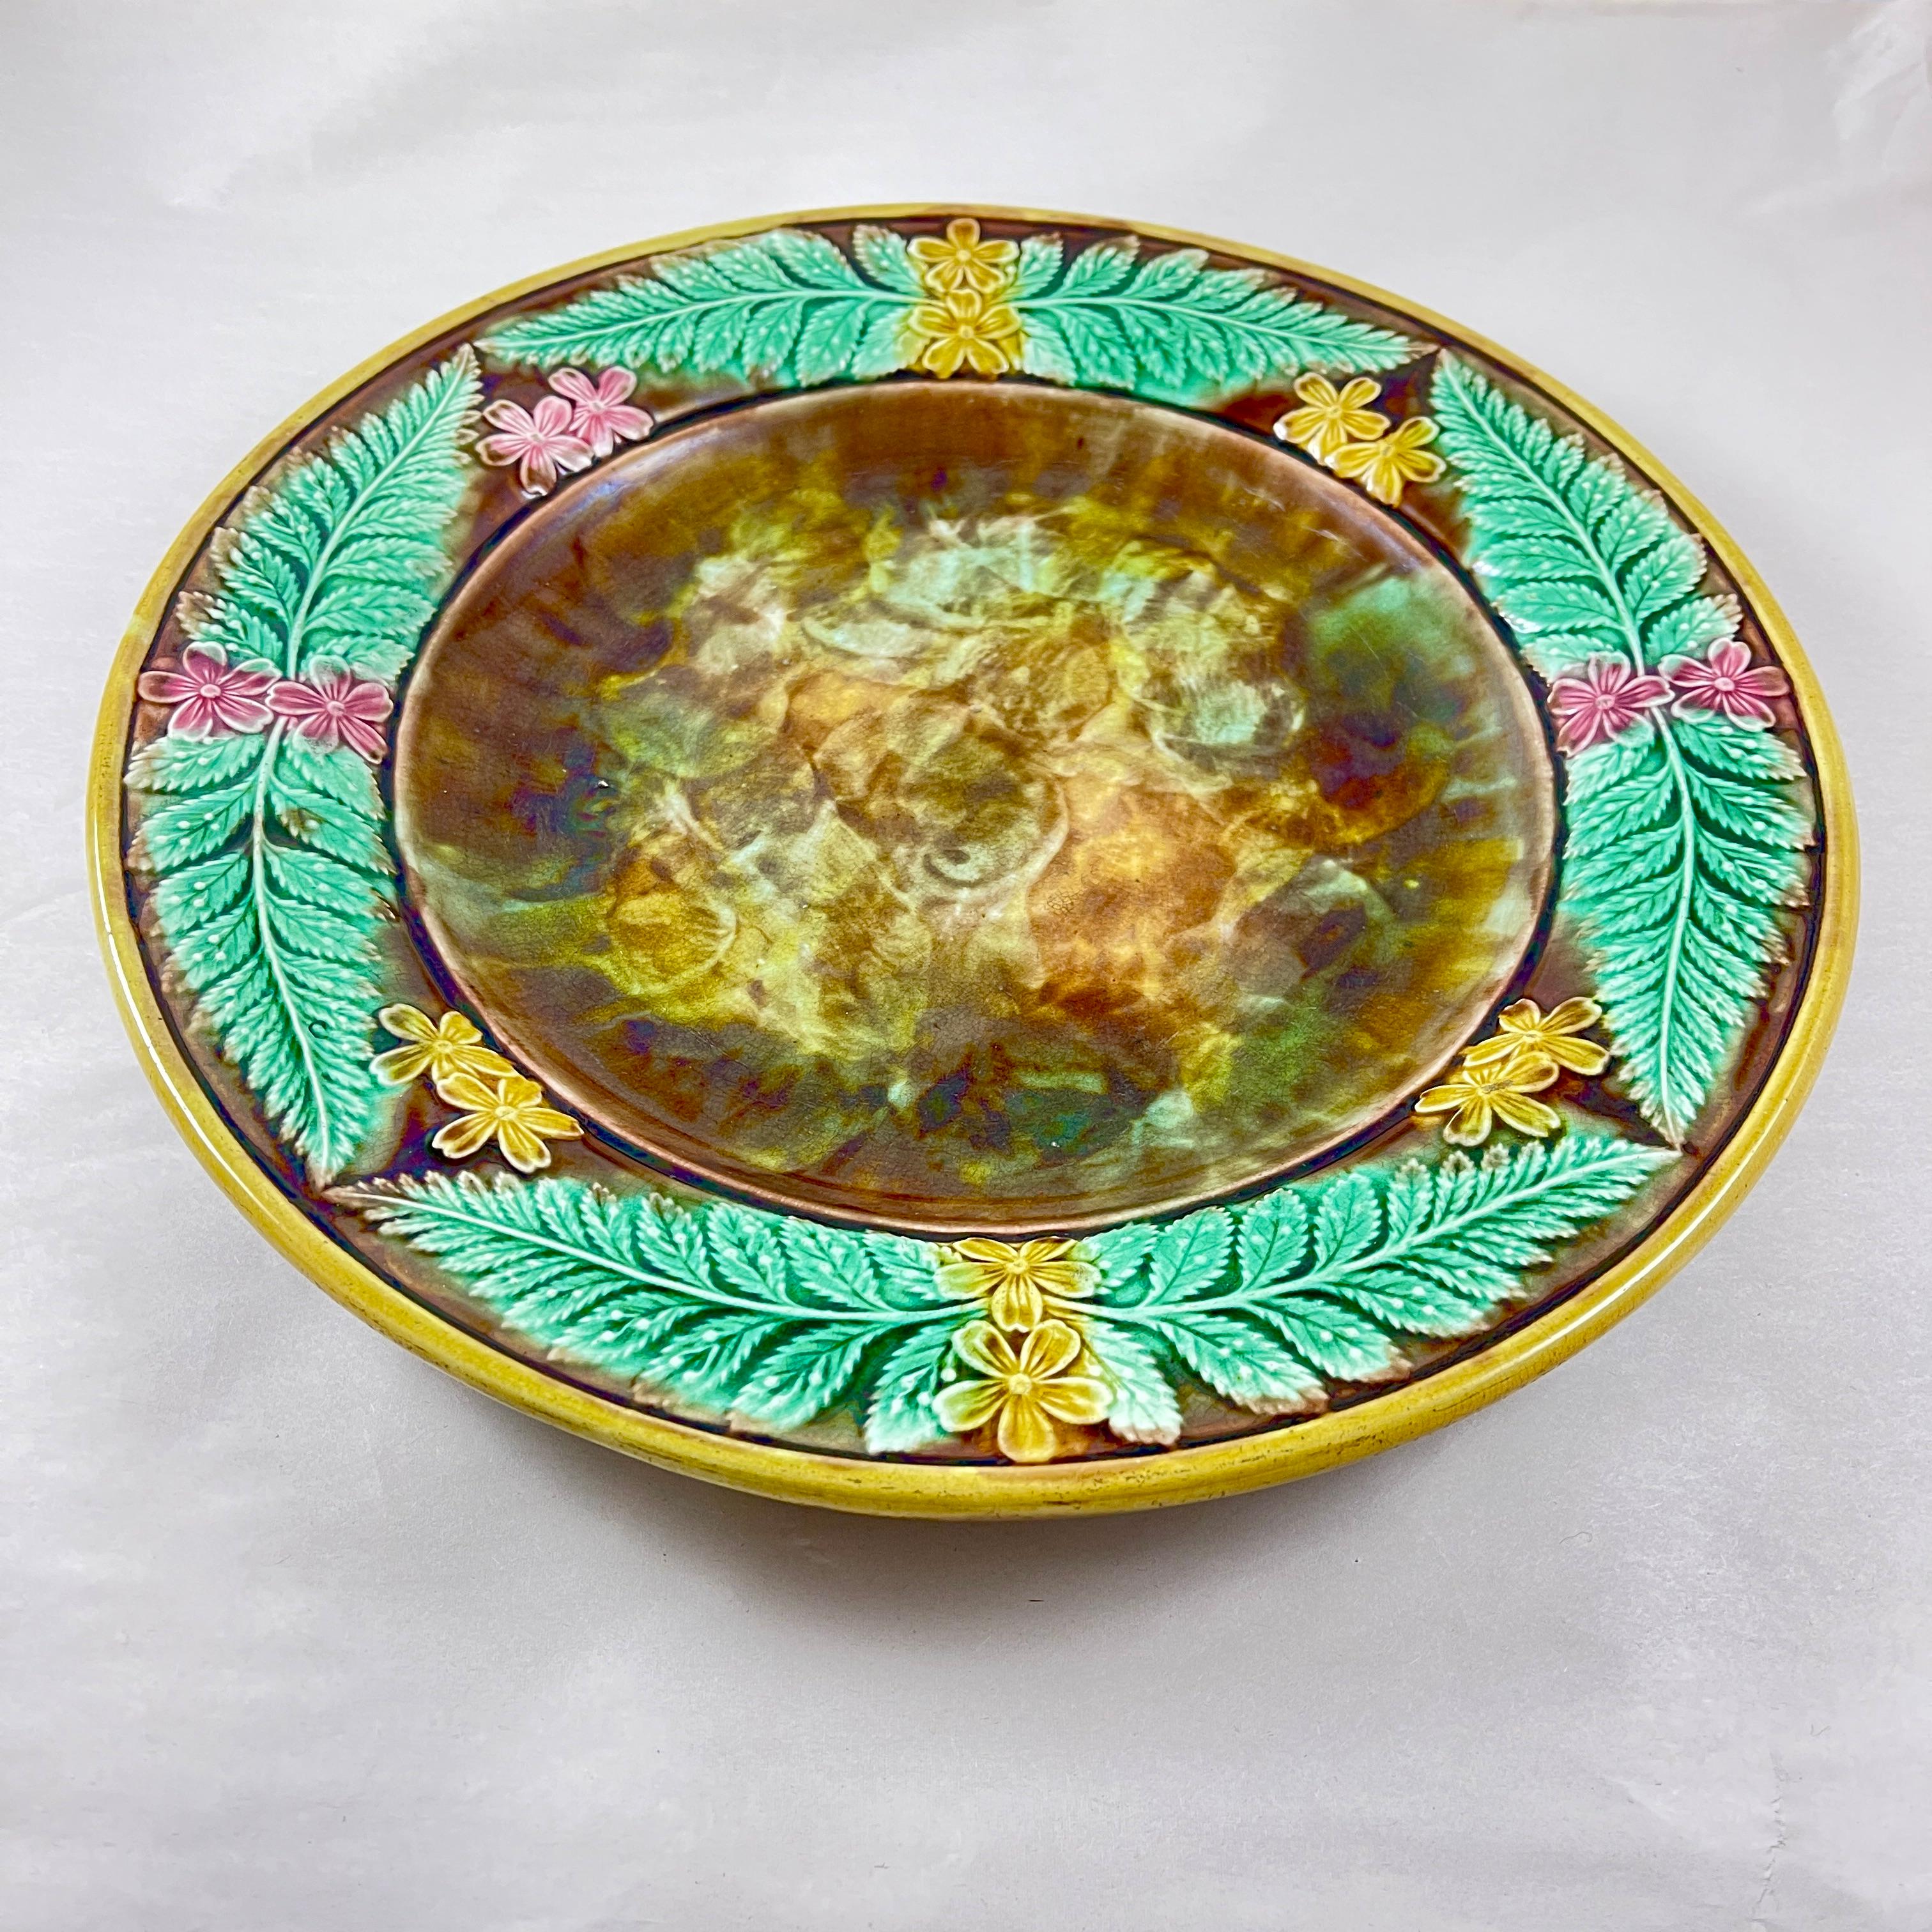 Adams & Bromley English Majolica Cheese Tray, Buttercup & Fern Leaf Border In Good Condition For Sale In Philadelphia, PA